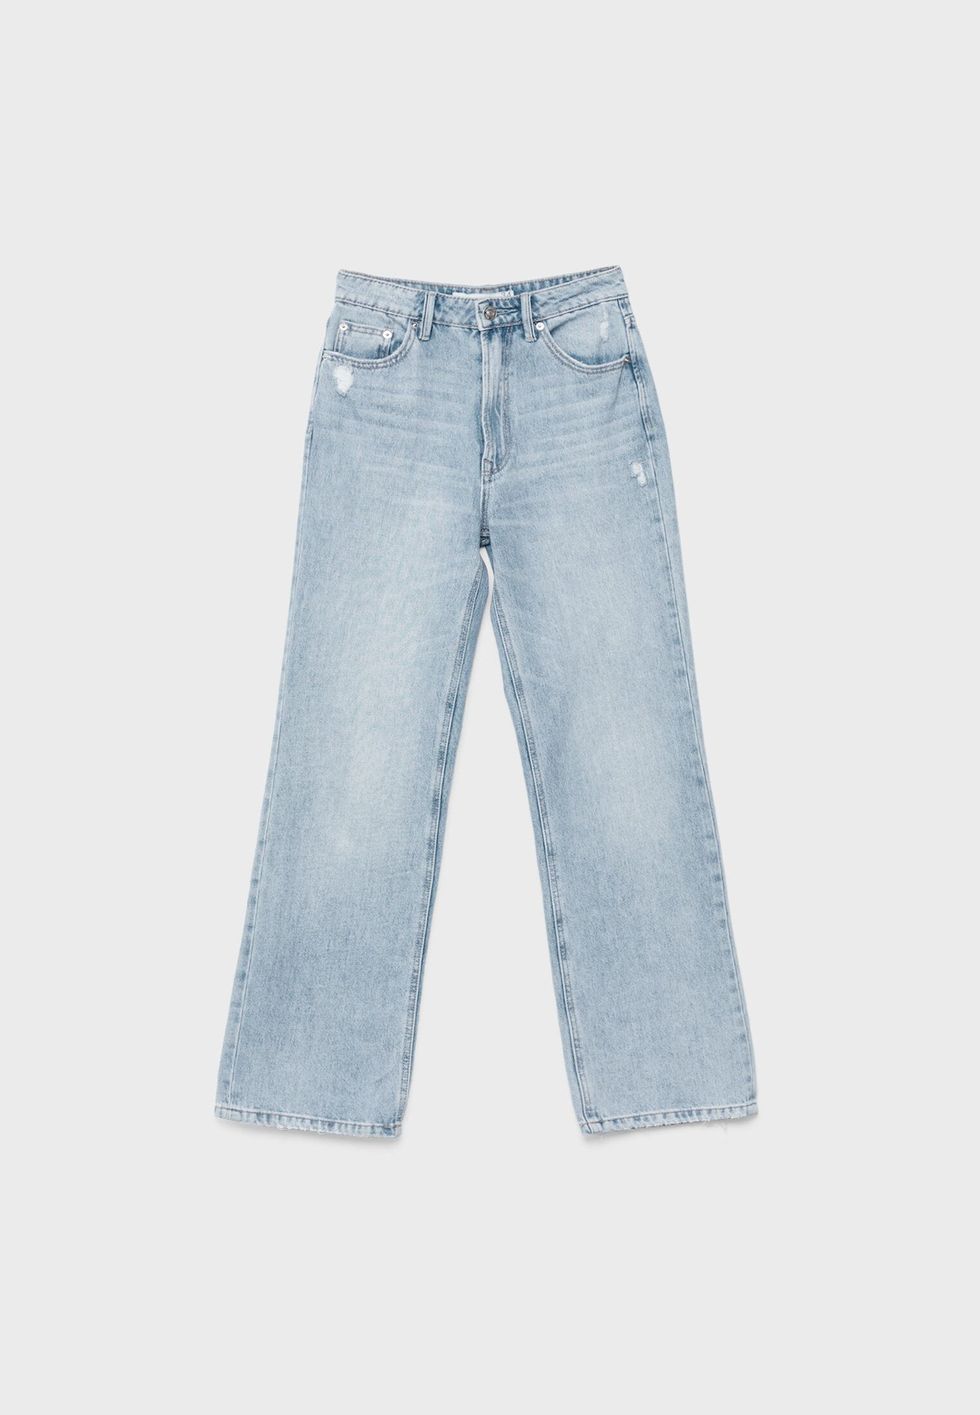  D92 Jeans straight wide